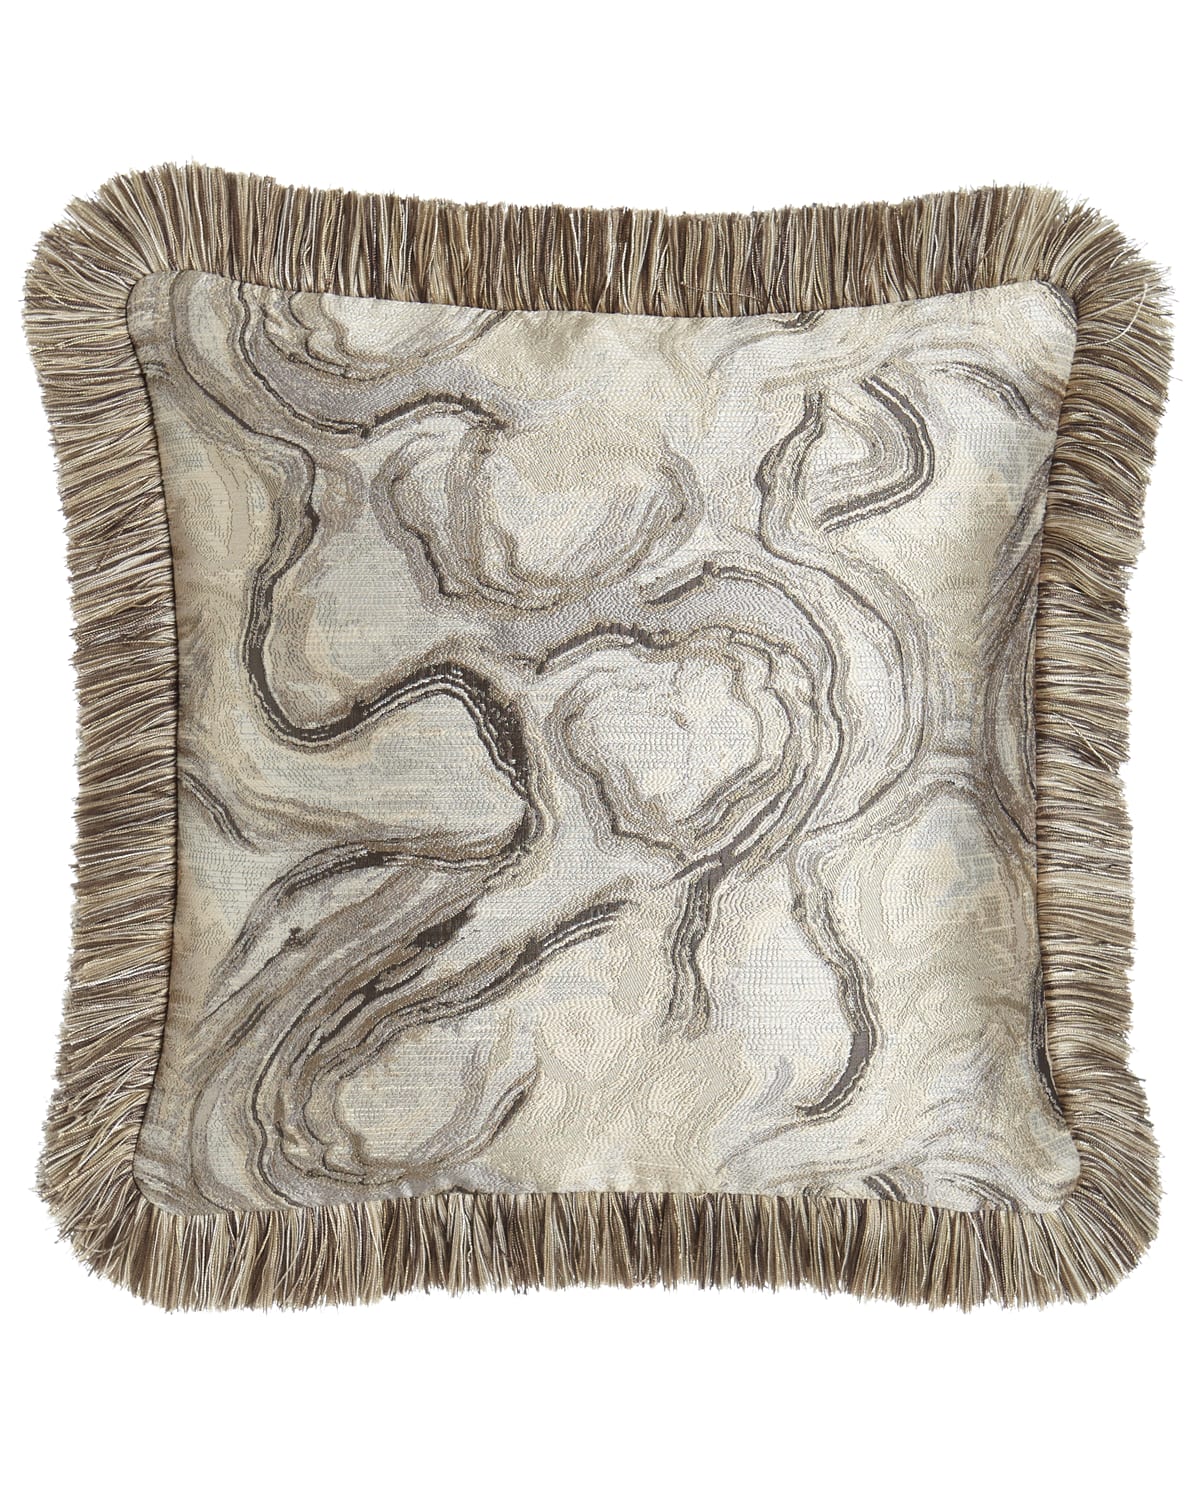 Image Dian Austin Couture Home Driftwood Reversible Pillow, 18"Sq.